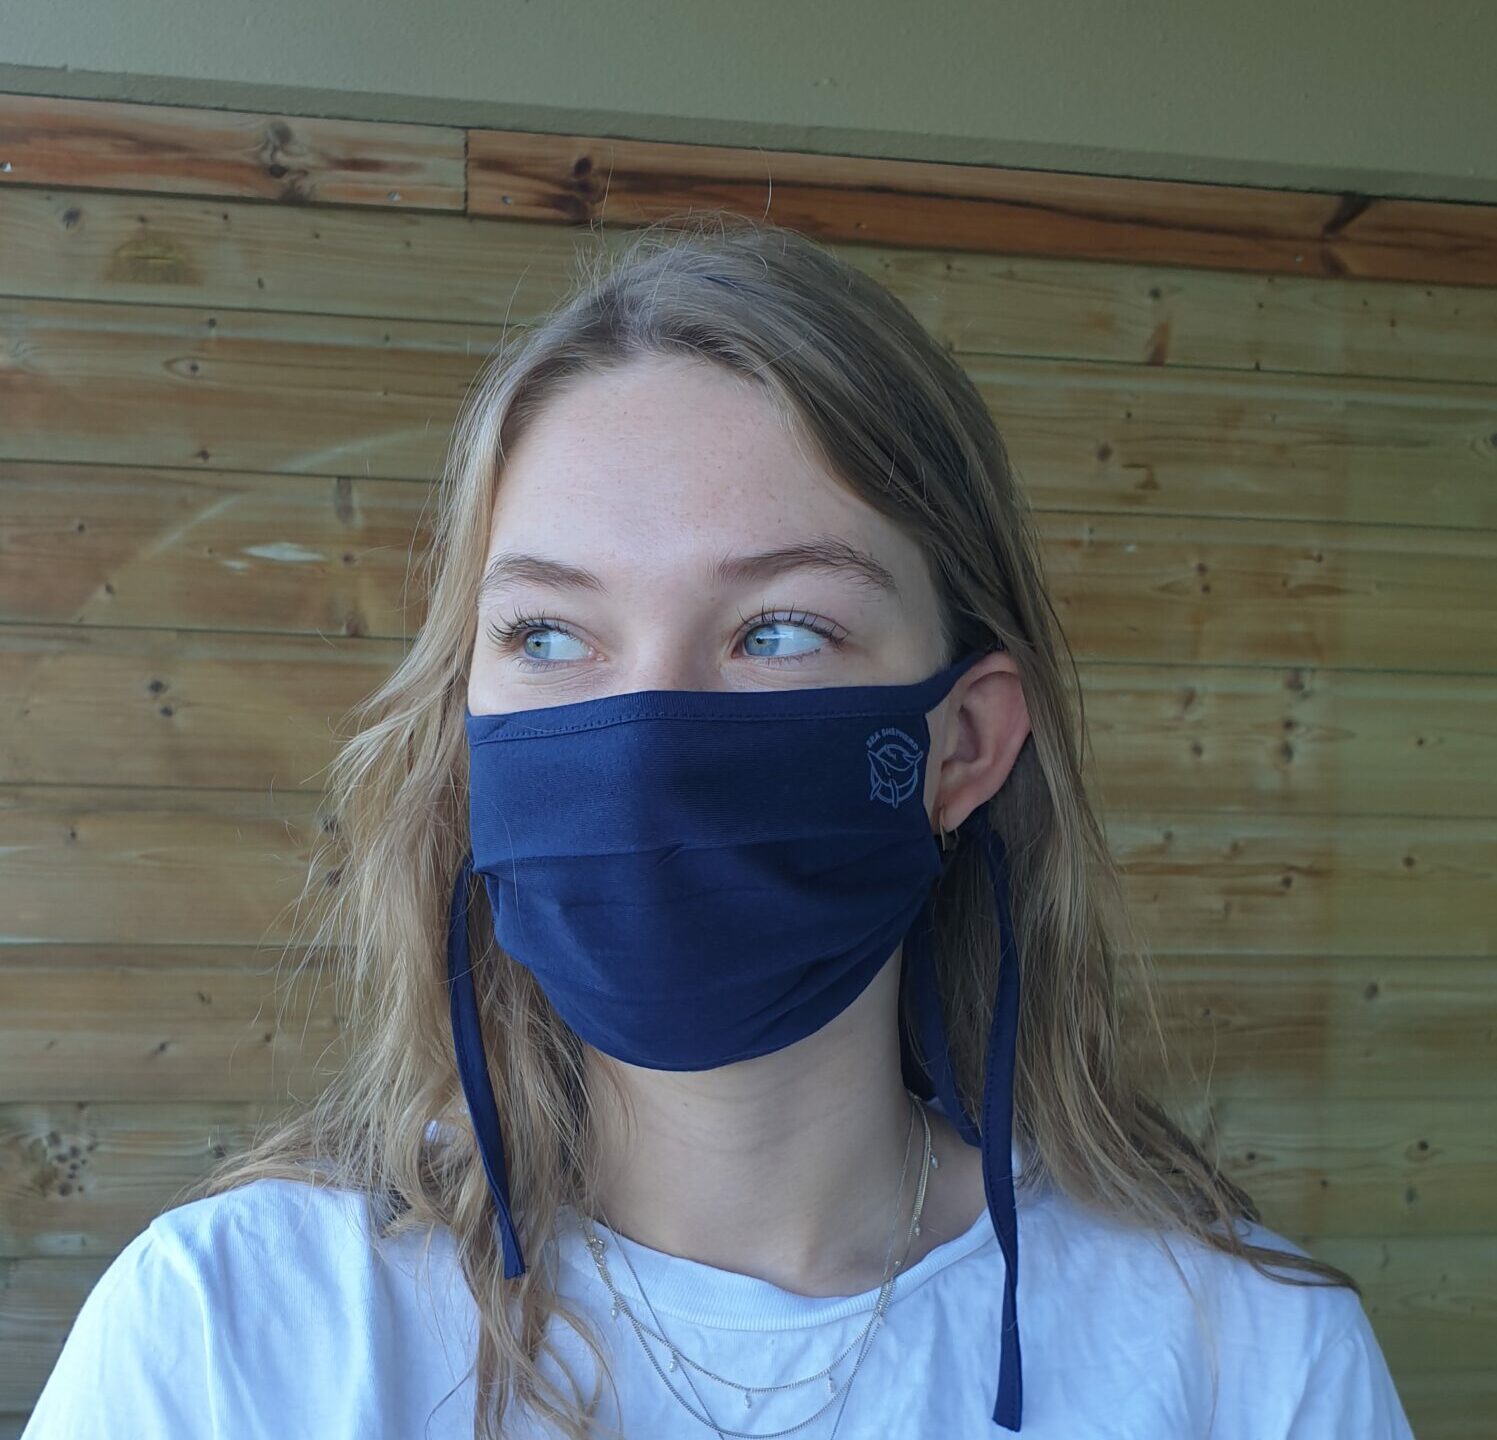 New: very light breathable washable face masks for summer days